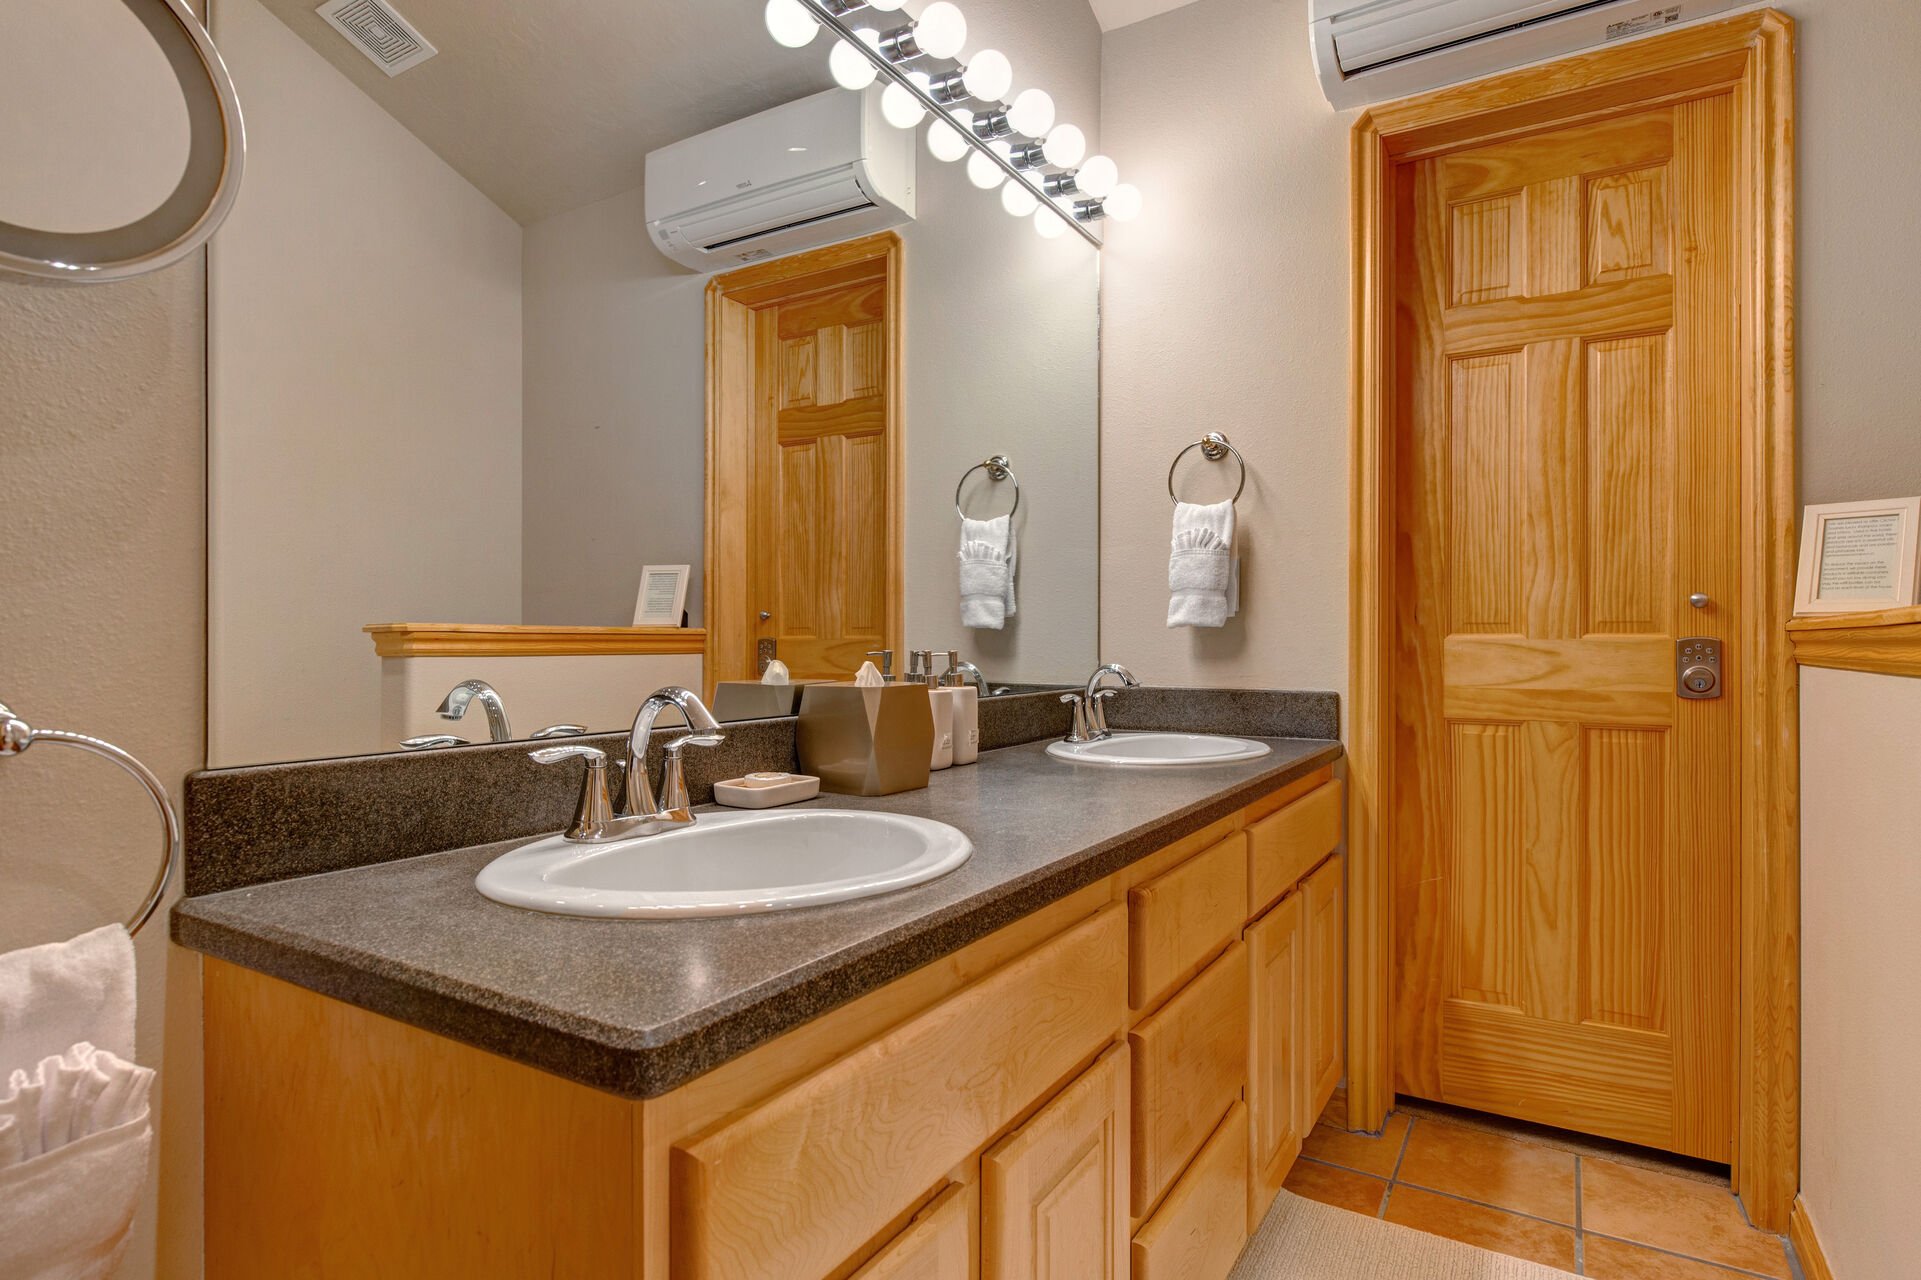 Upper Level Master Suite Bathroom, jetted tub, and separate tiled shower